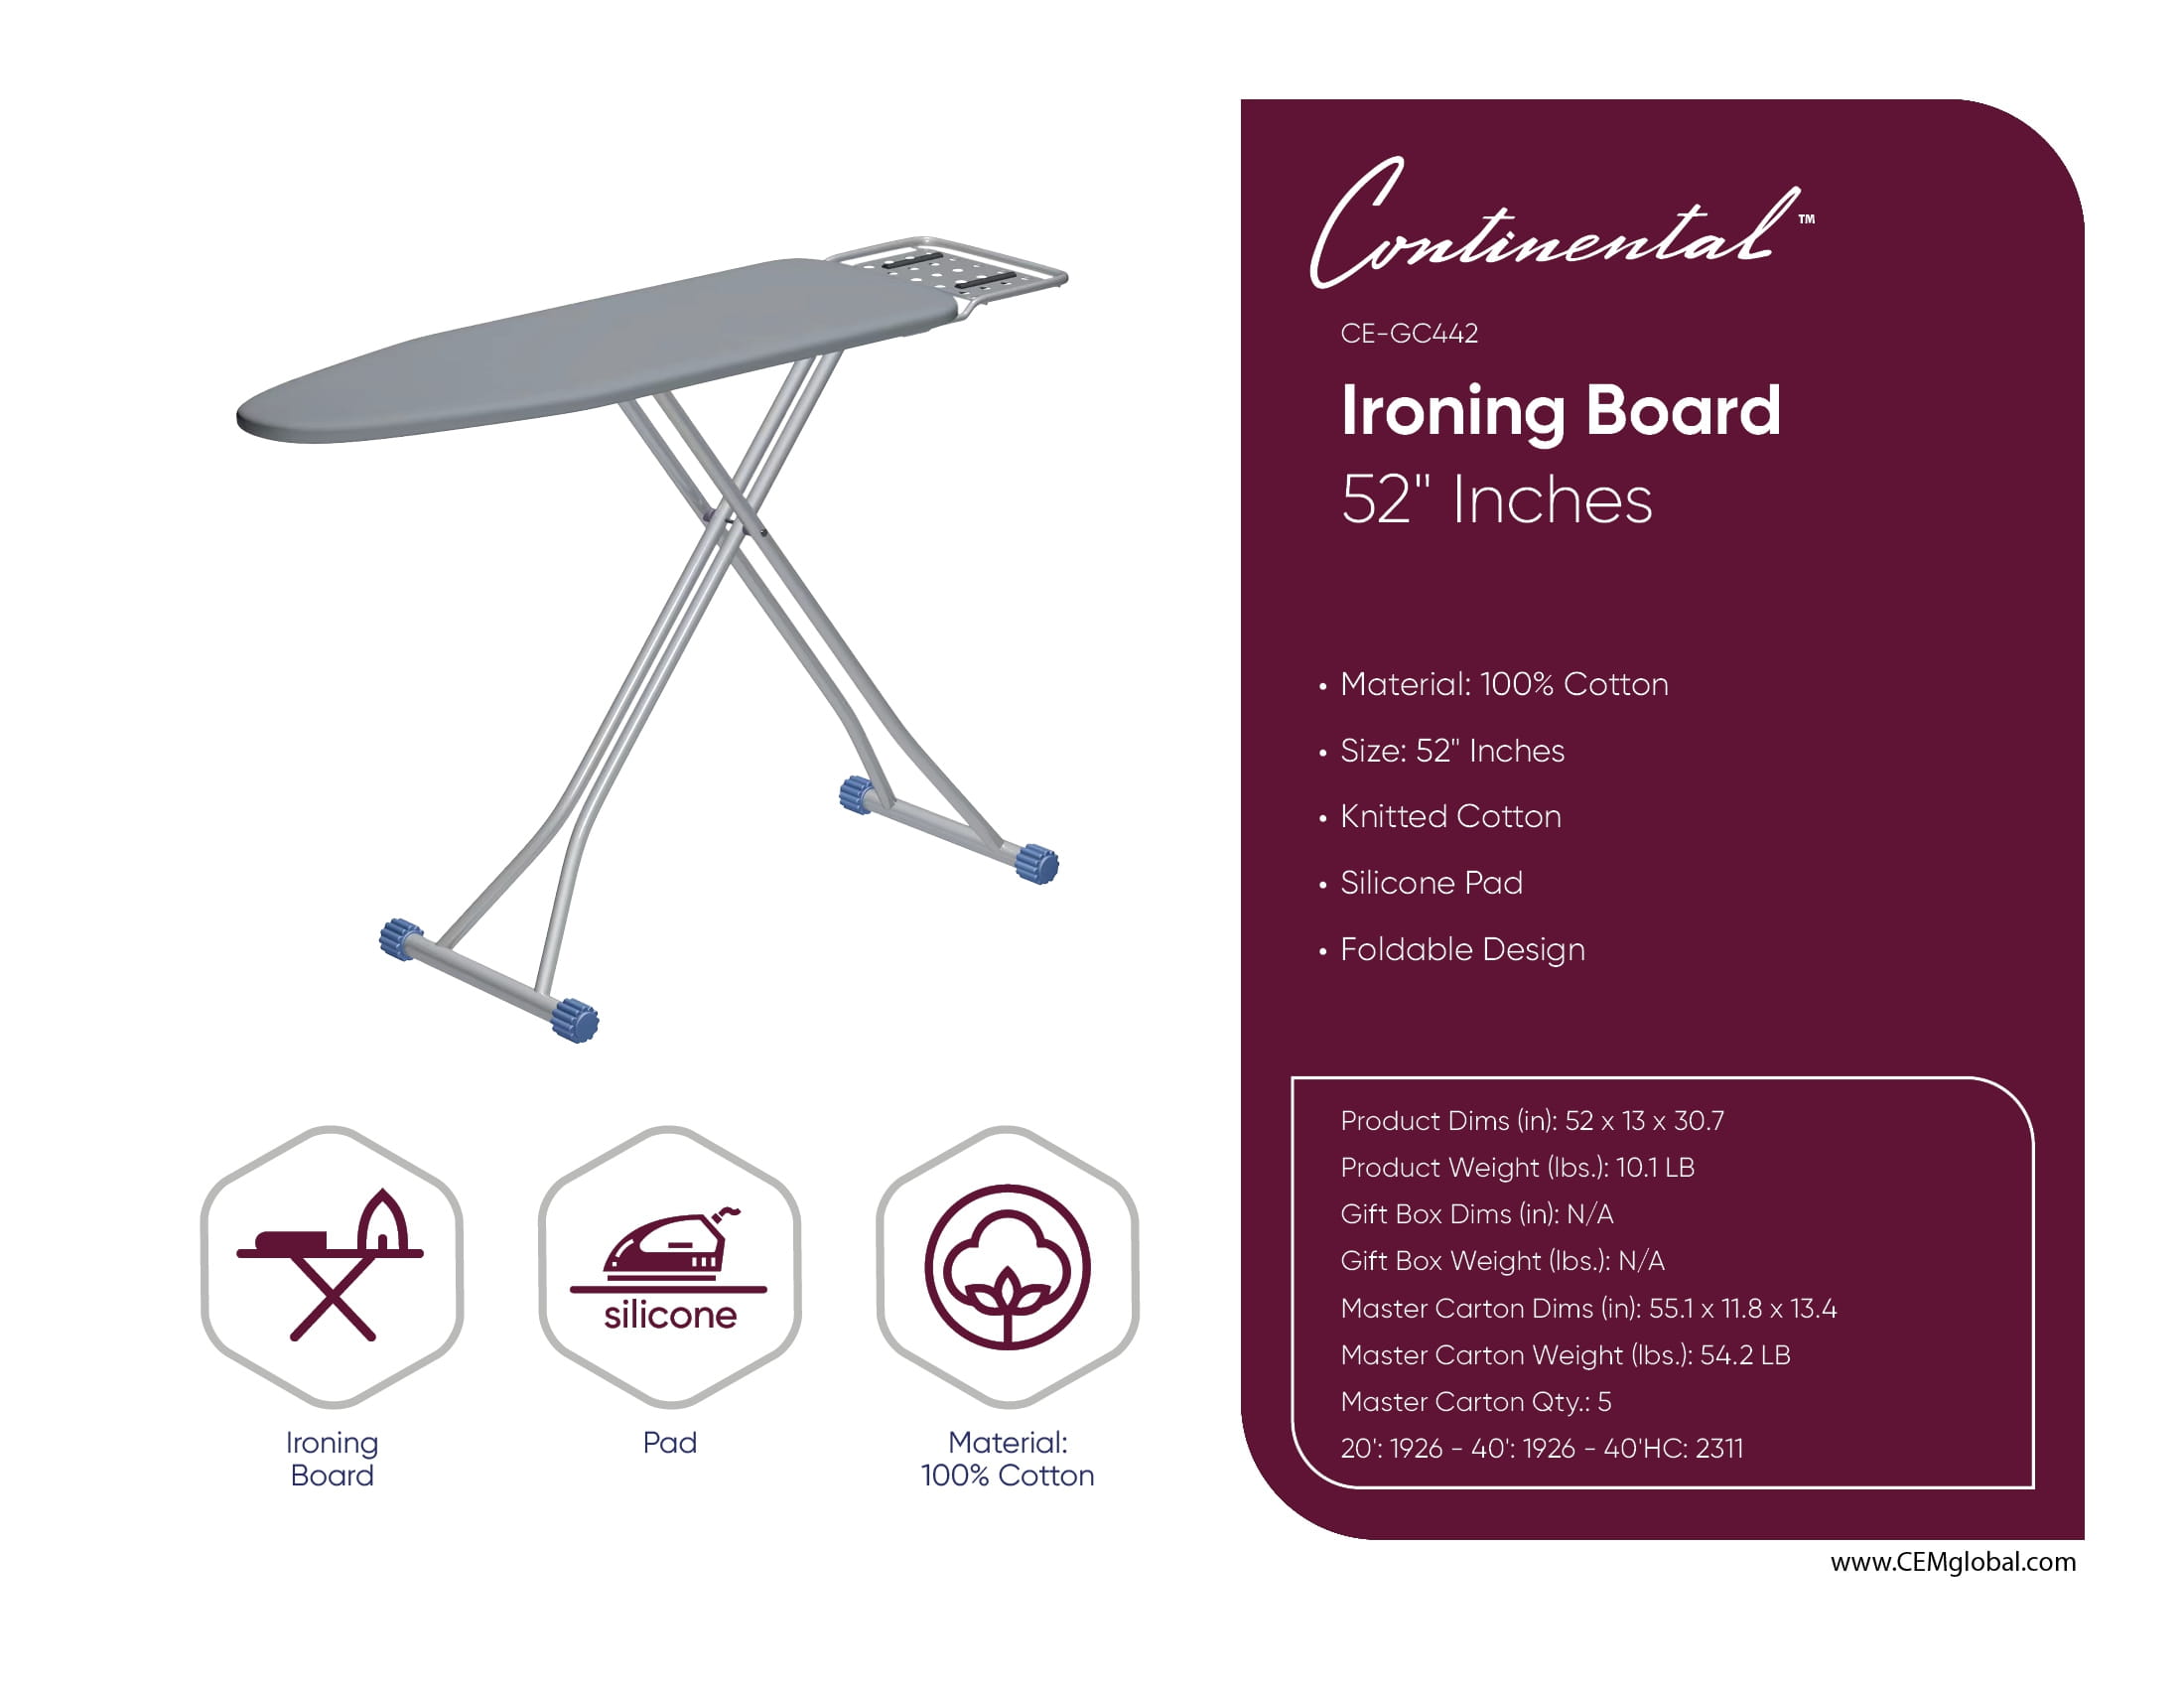 Ironing Board 52" Inches